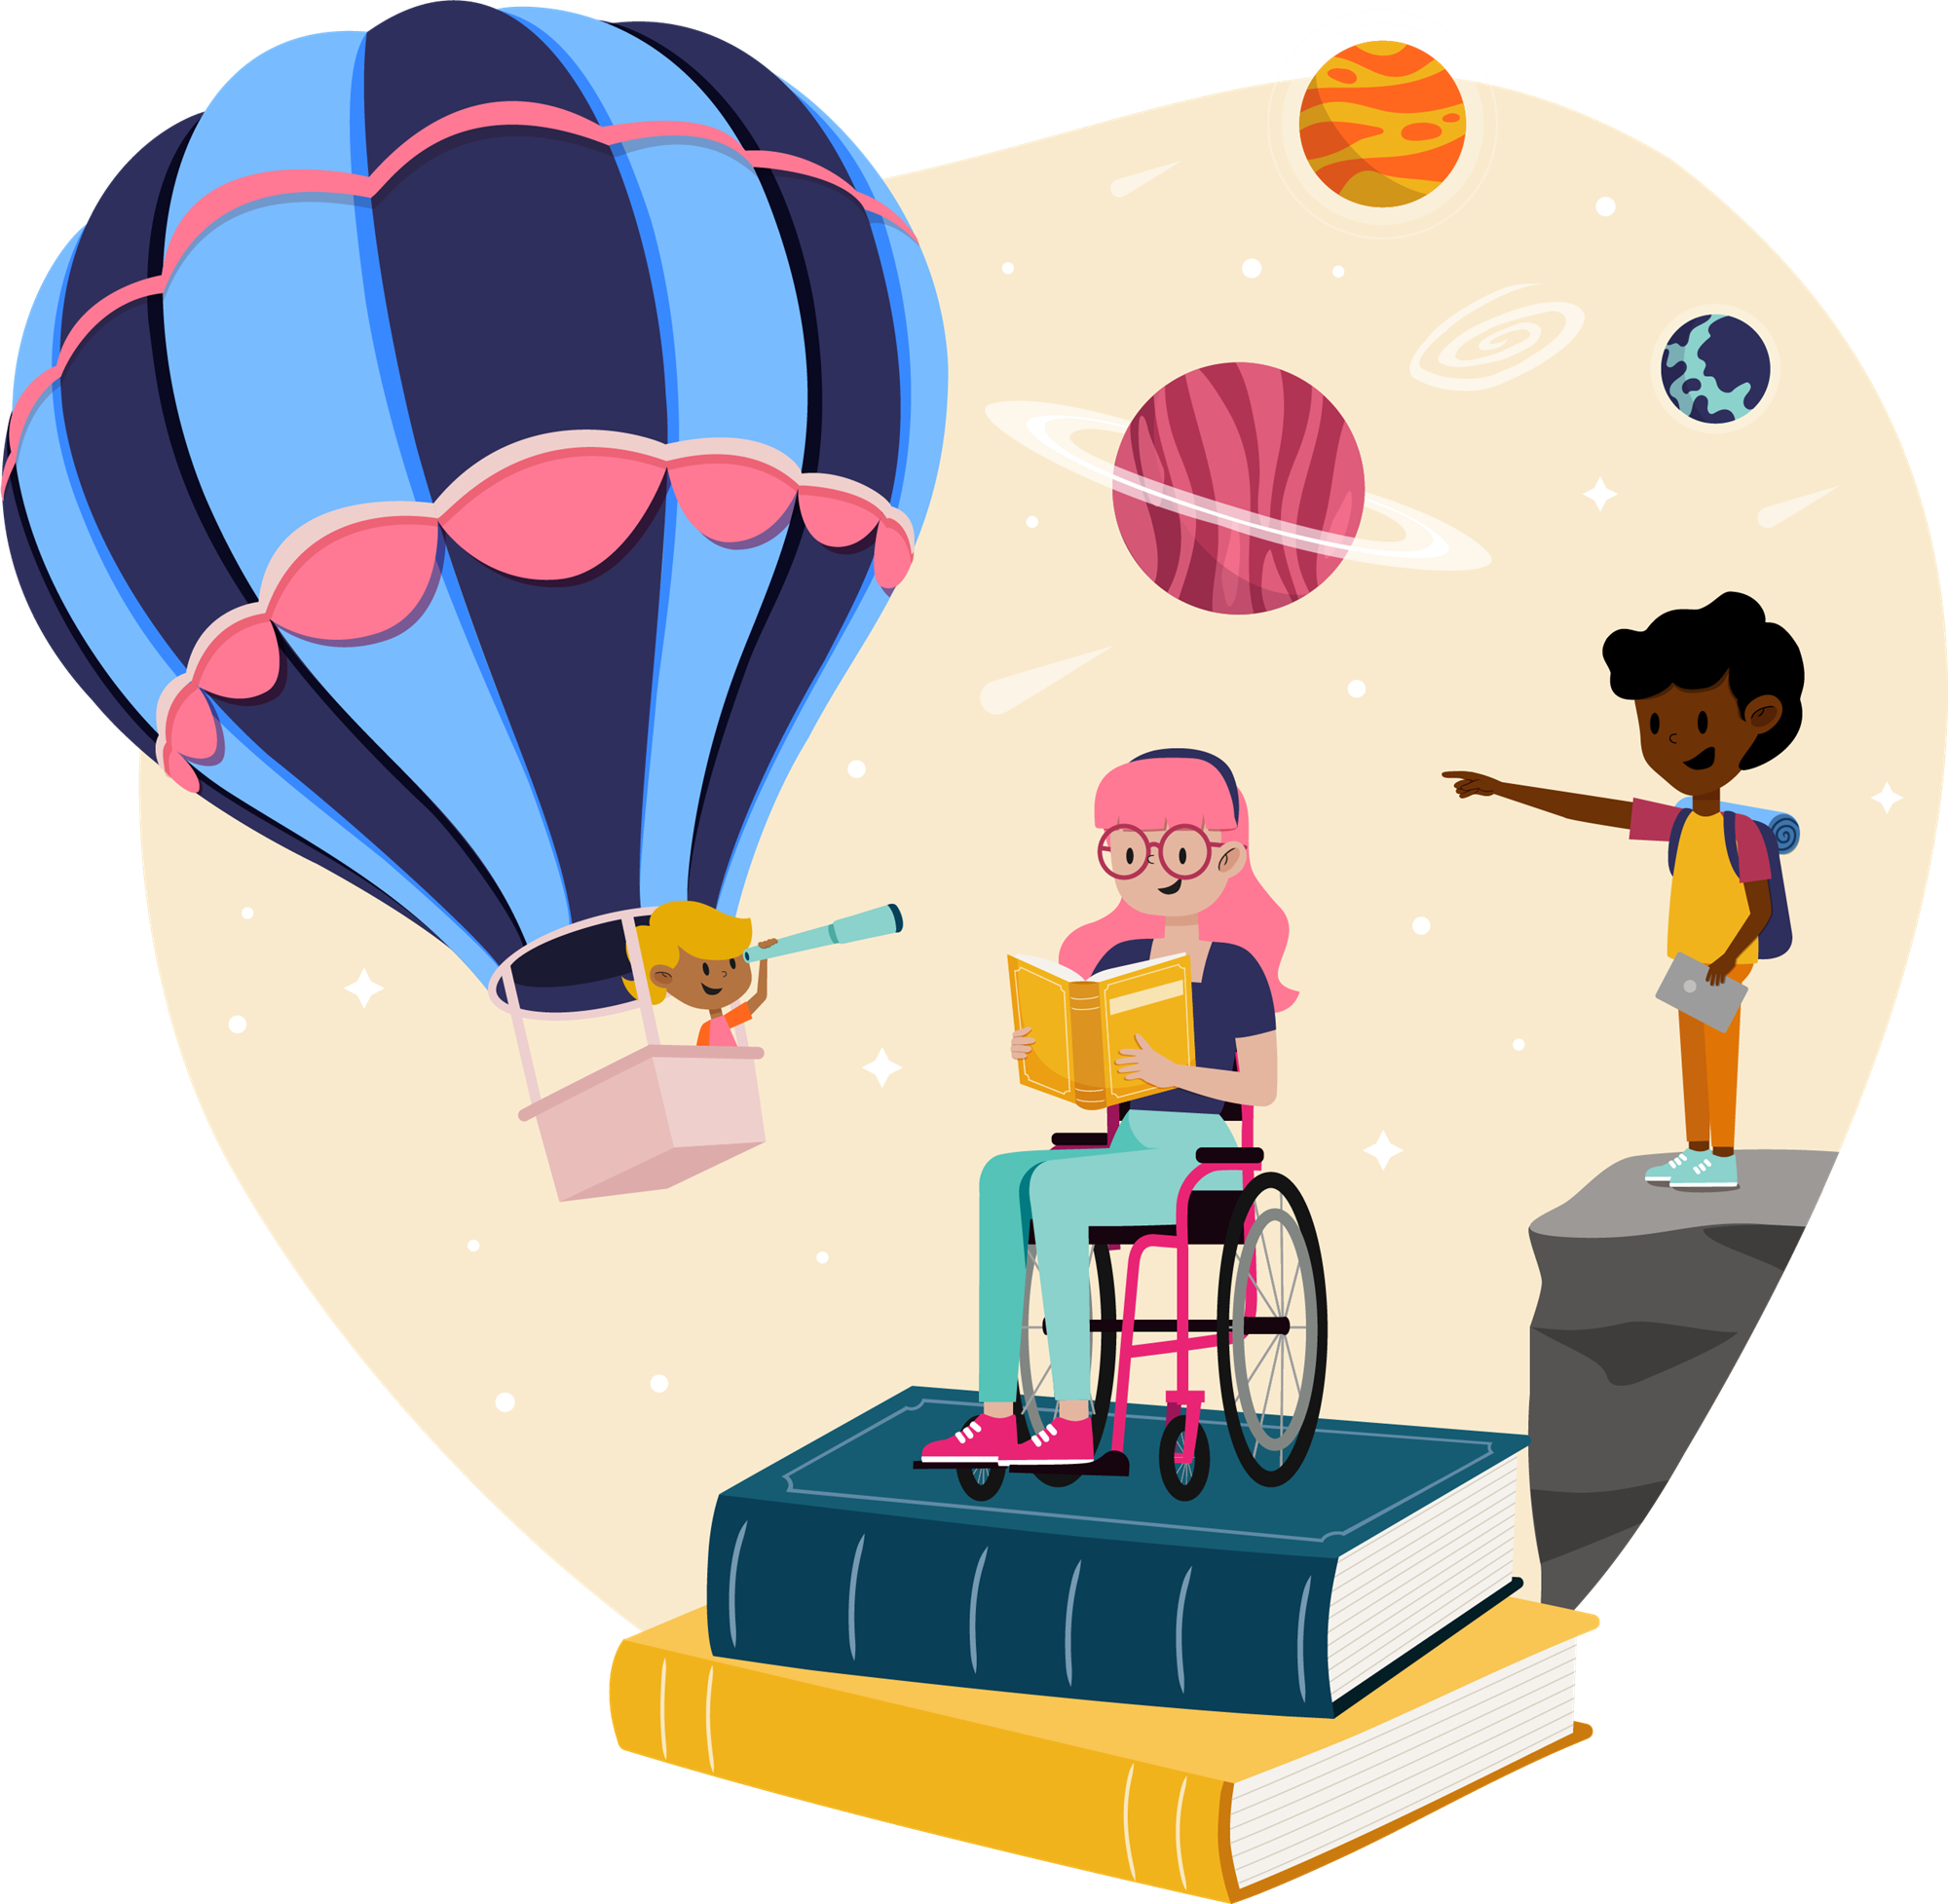 A person is sitting in a wheelchair reading a book. The wheelchair is on top of two stacked books. To the left, a person looks through a telescope while riding in a hot air balloon. To the right, a person is standing and pointing at the edge of a cliff. Three planets are above the people.